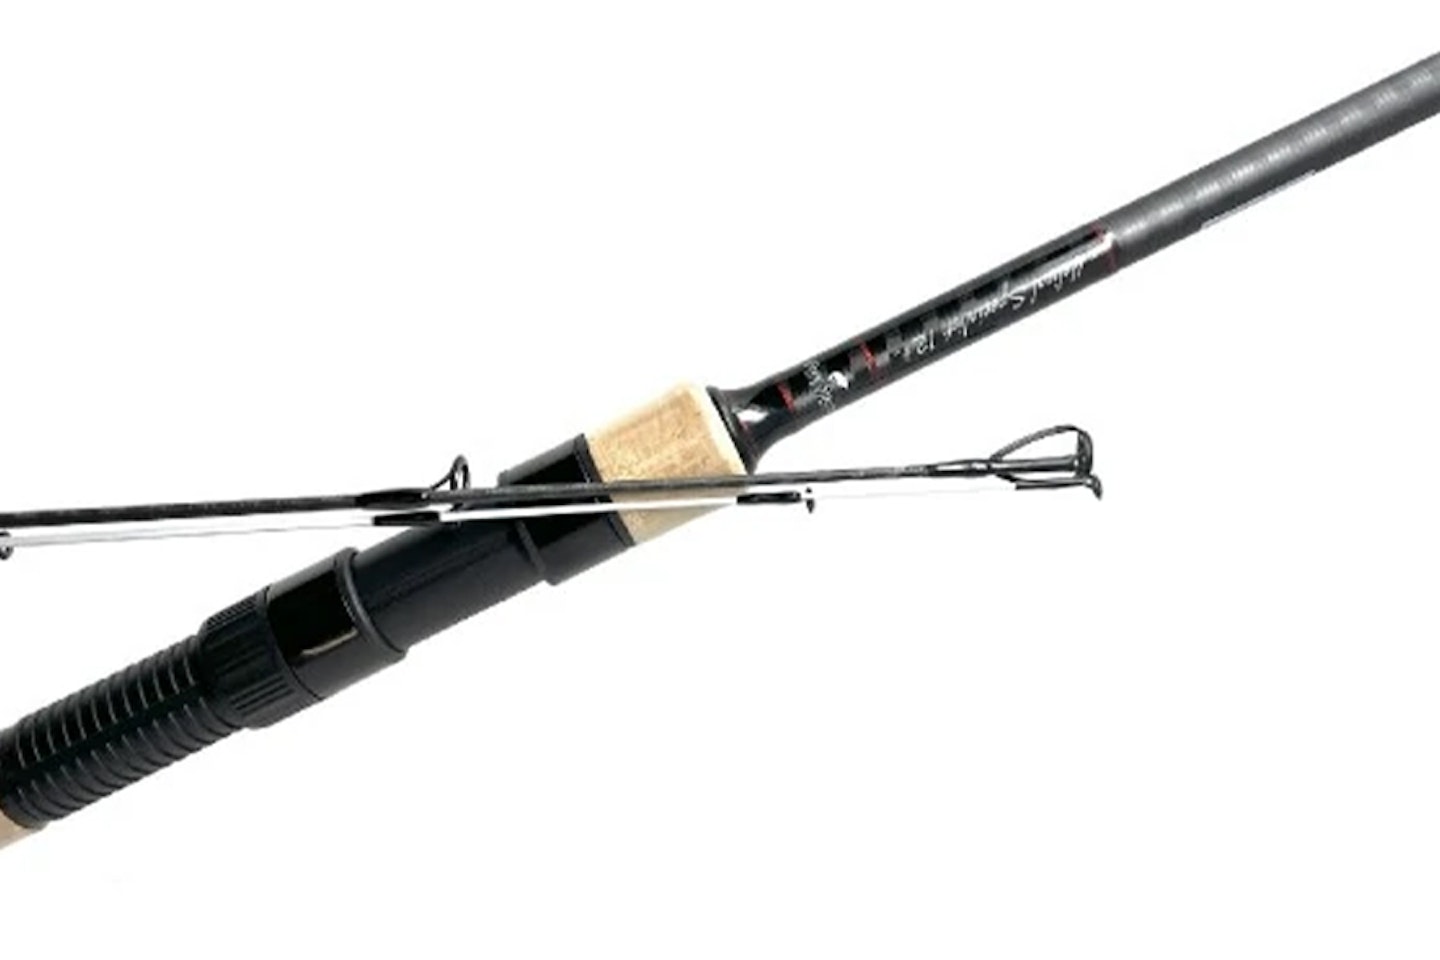 The best rods for barbel fishing